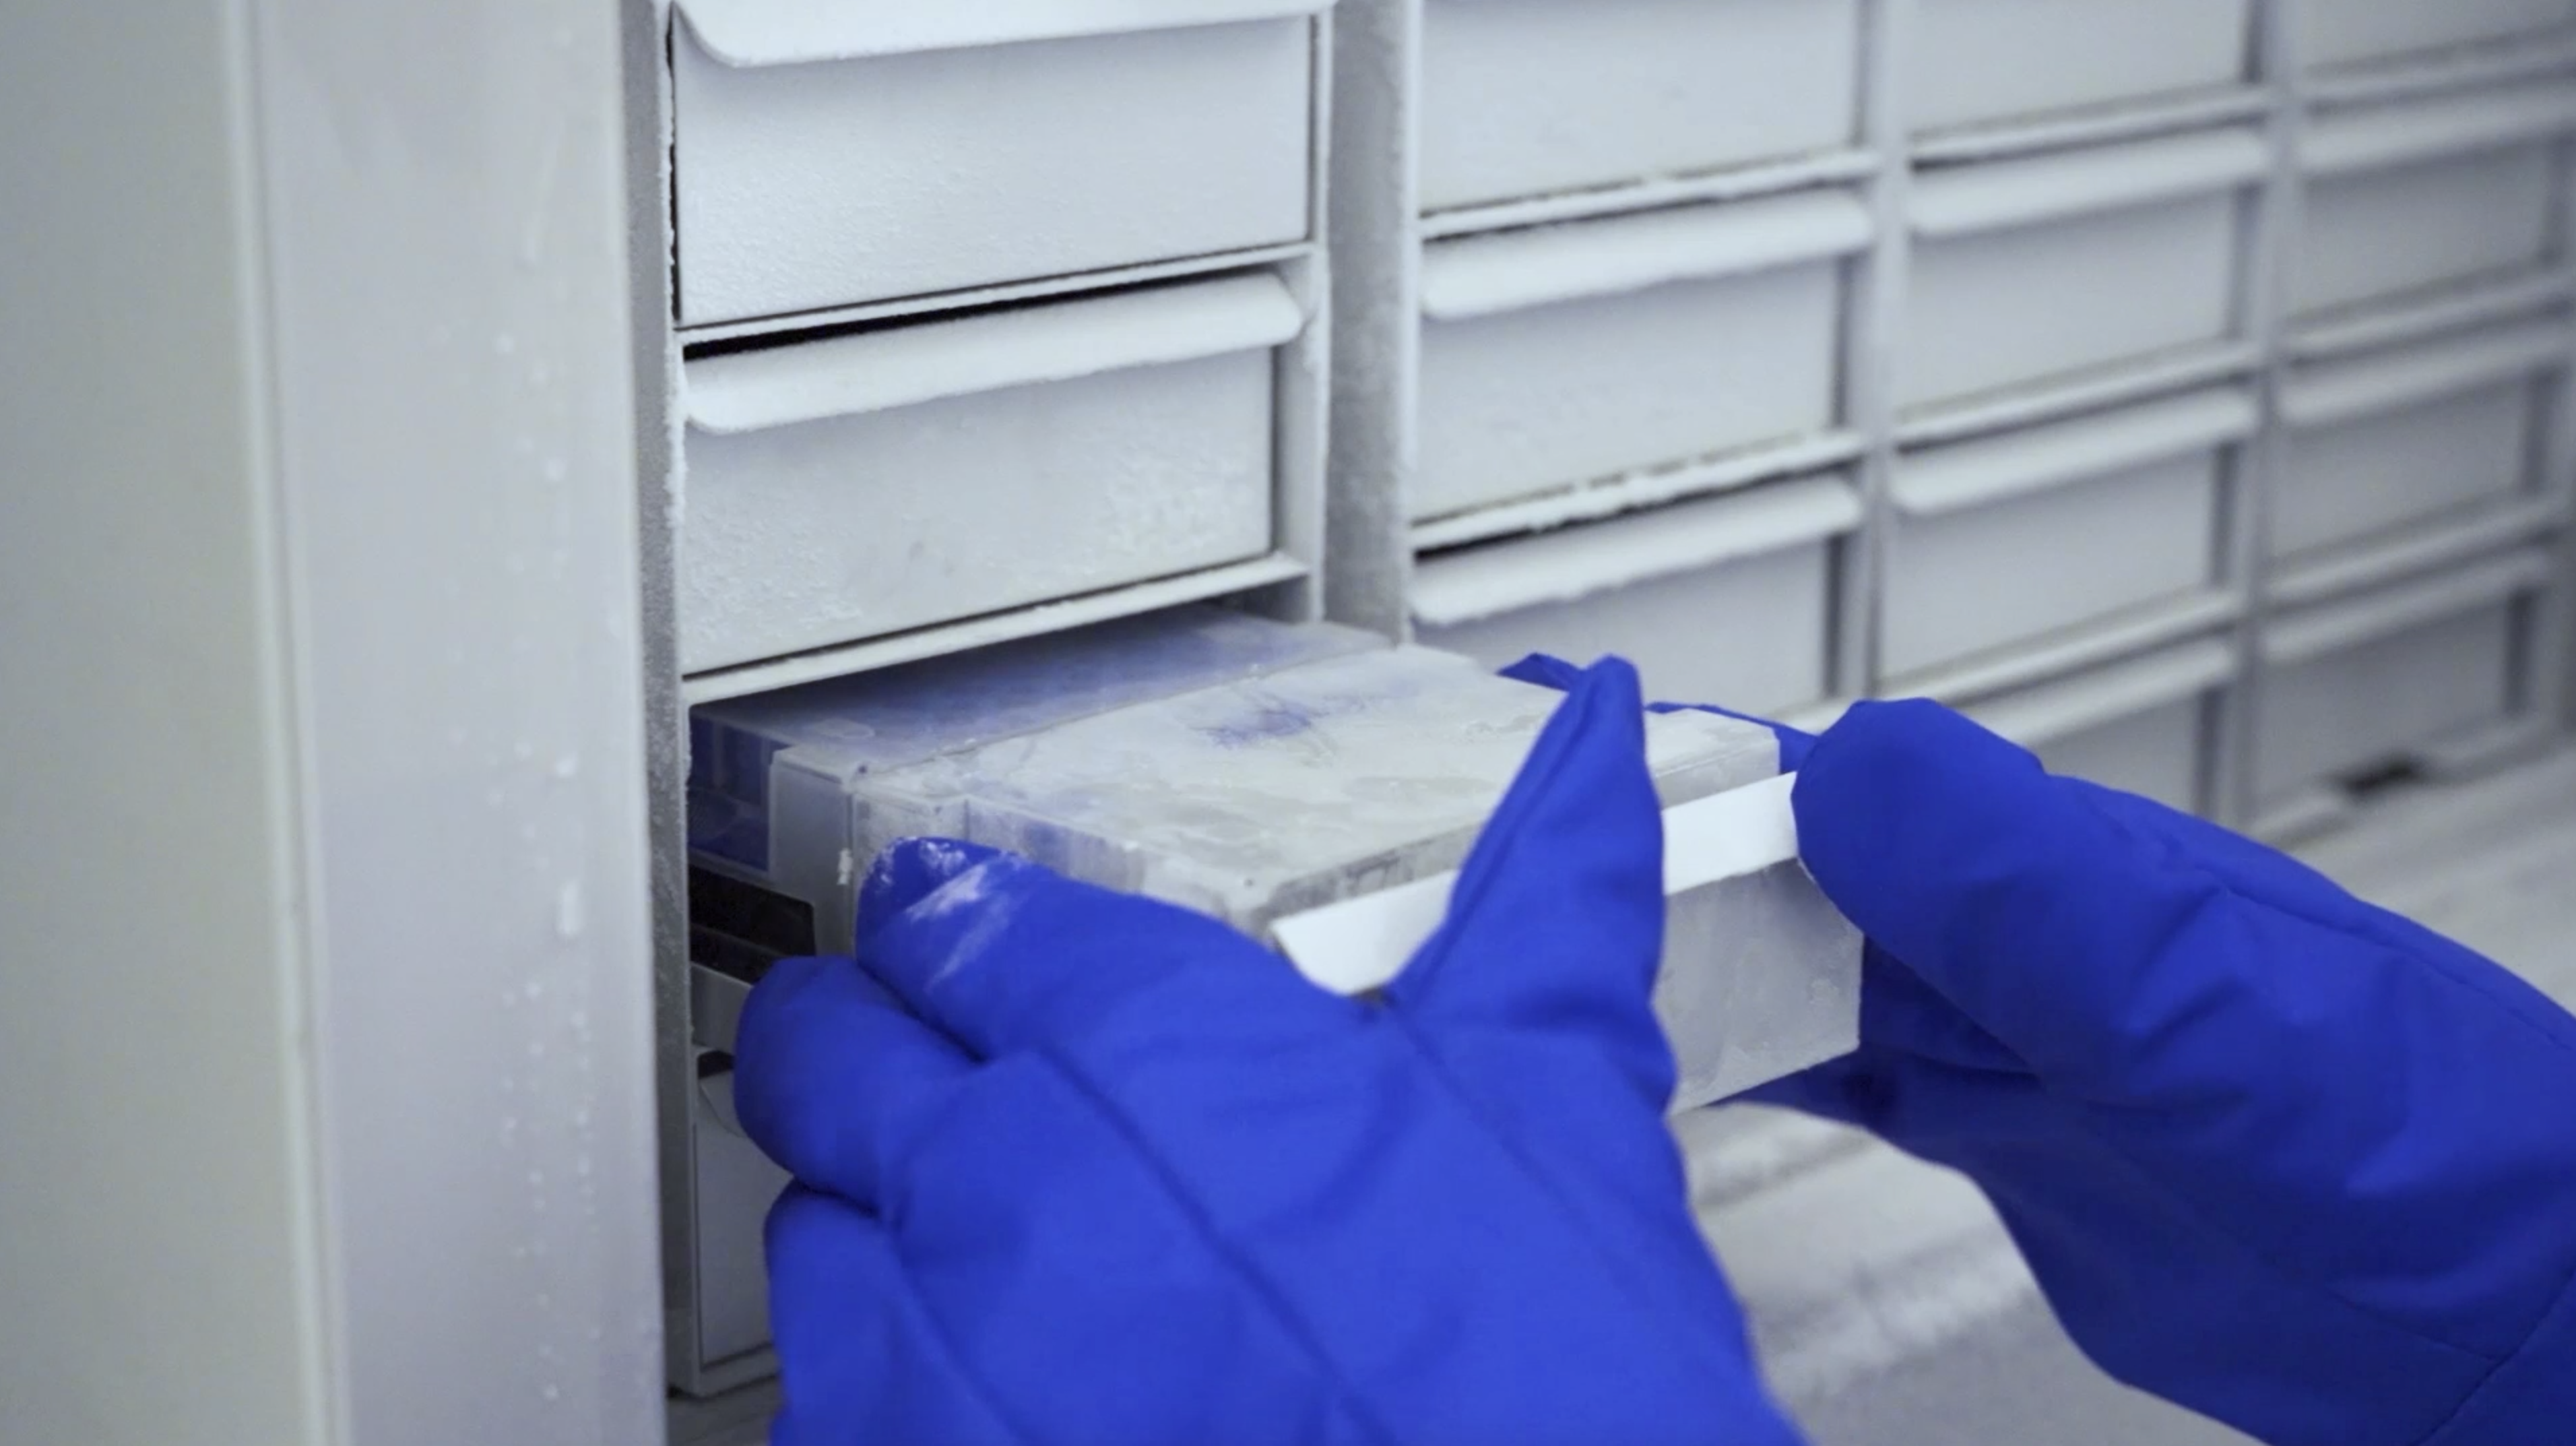 Our samples are stored away from light and kept at -80 degrees celsius. Each biobank freezer stores over 20,000 samples!